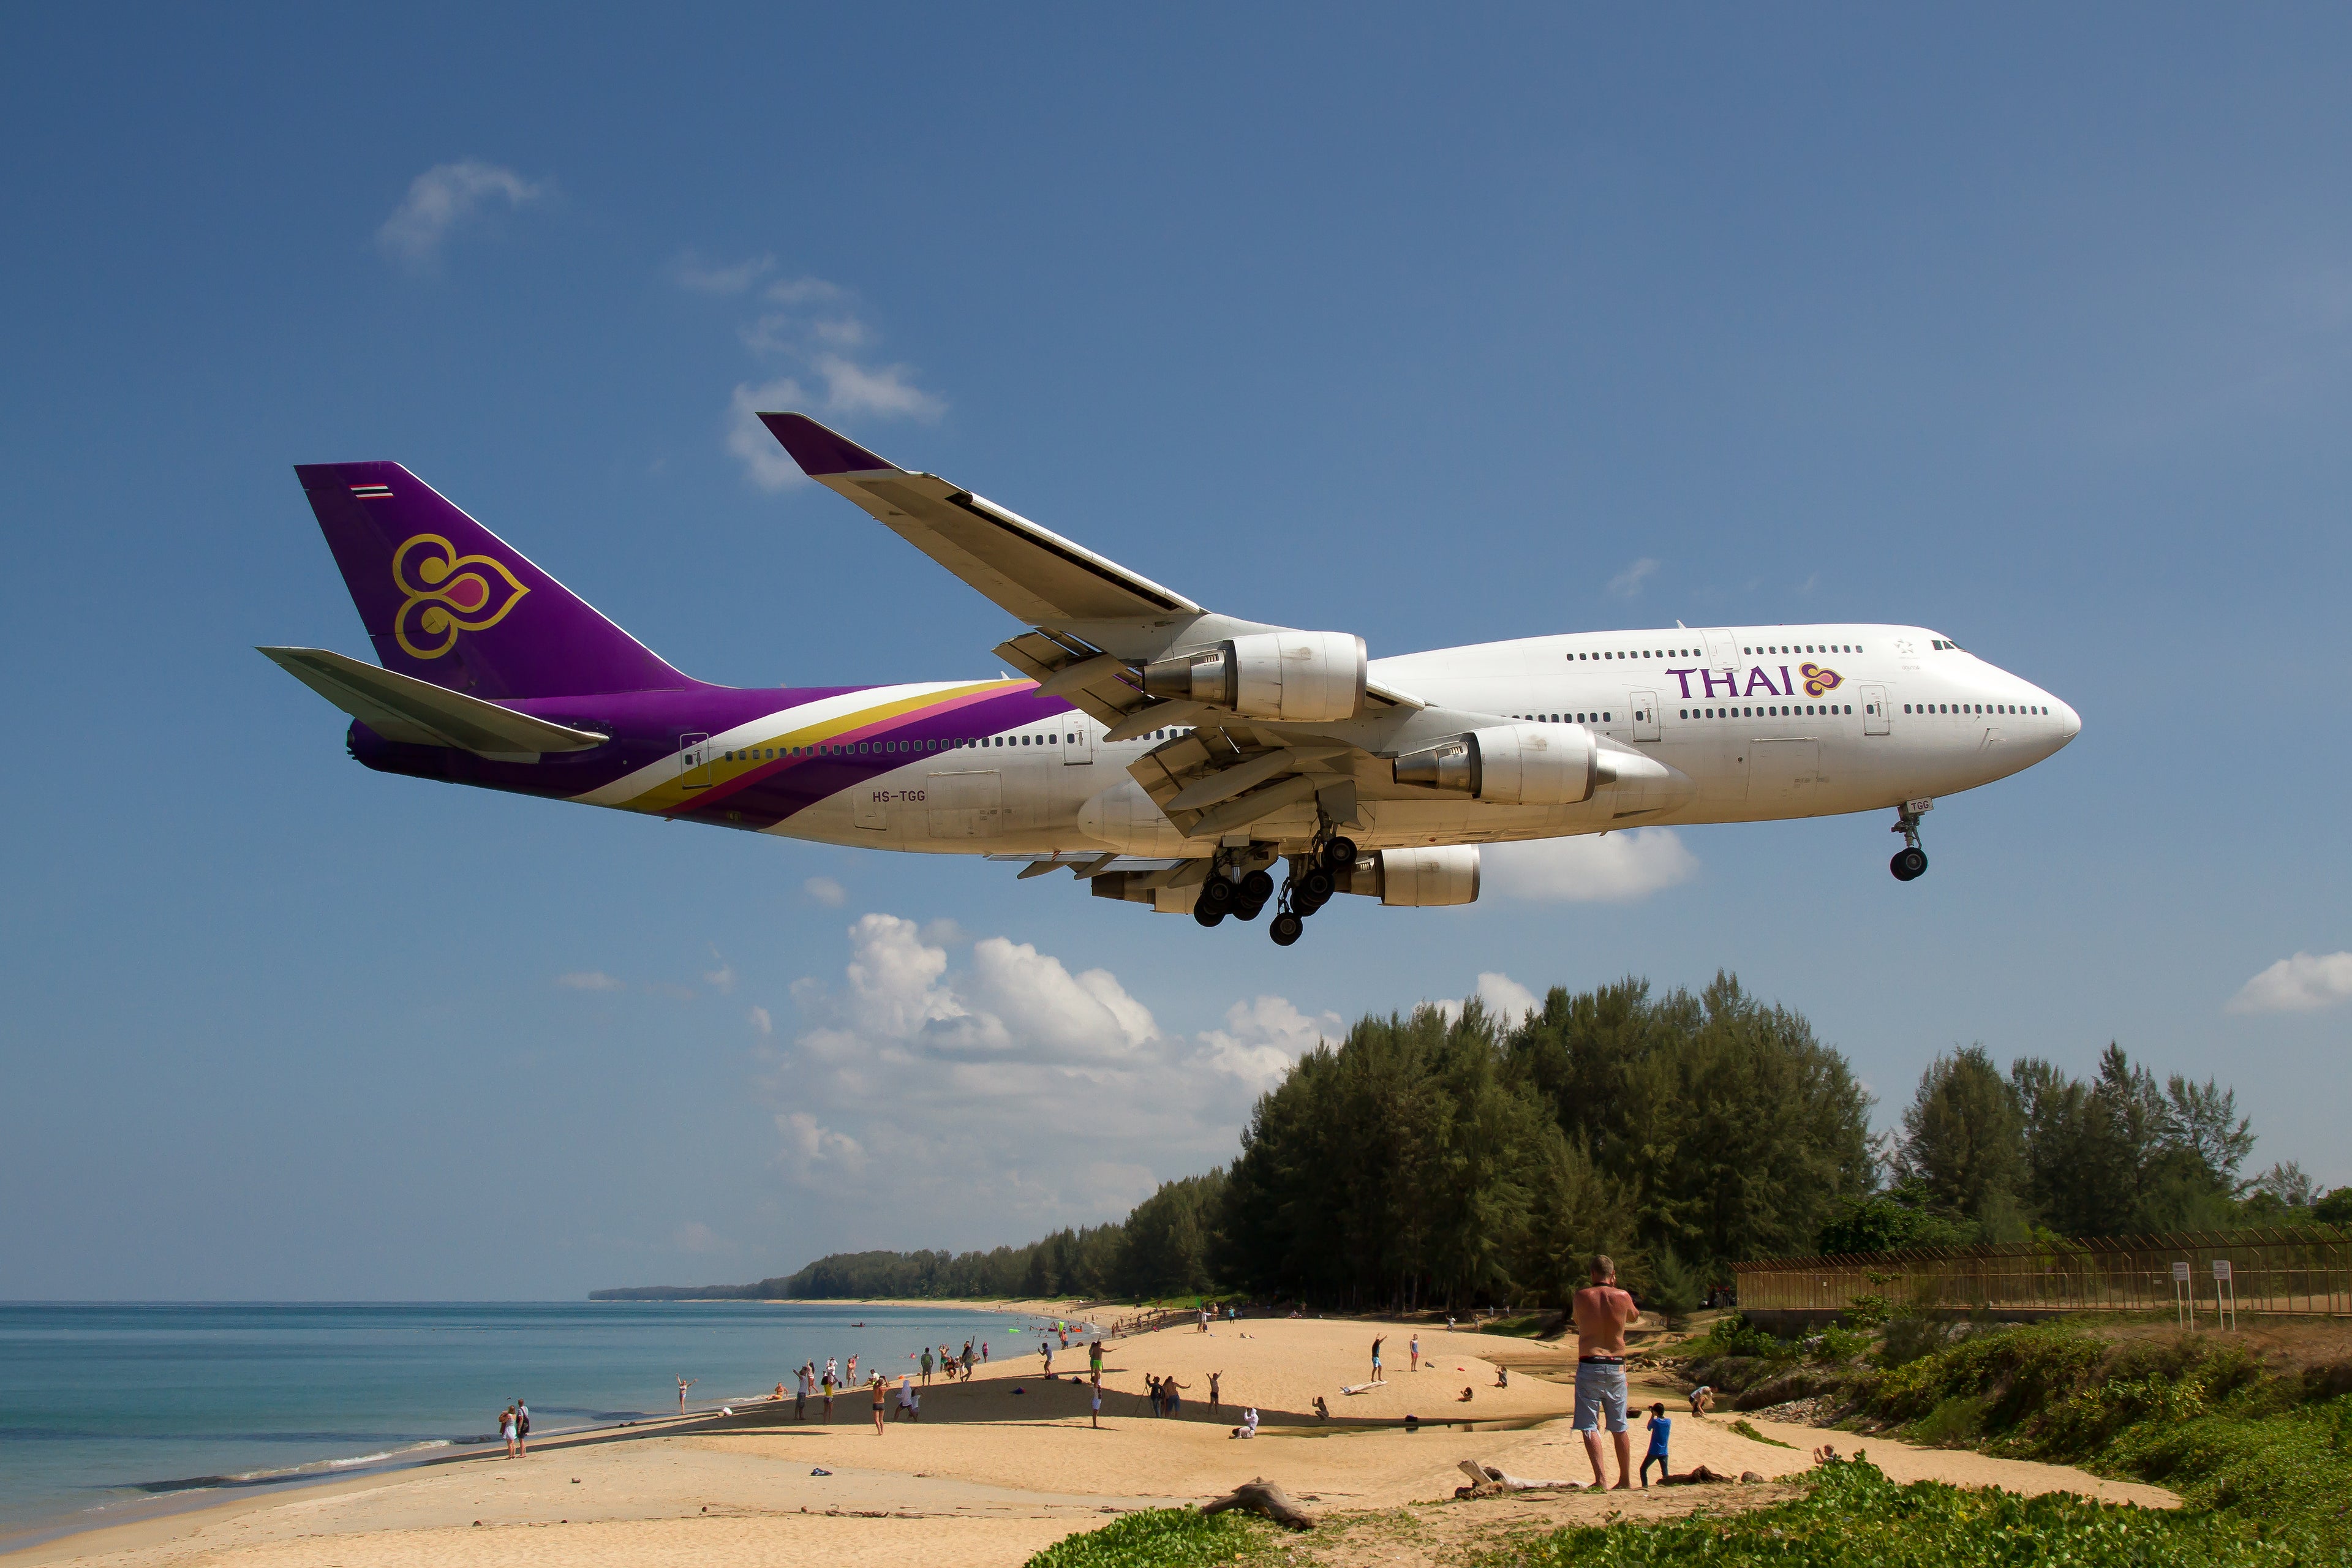 Thai Airways Boeing 747-400 about to complete a domestic